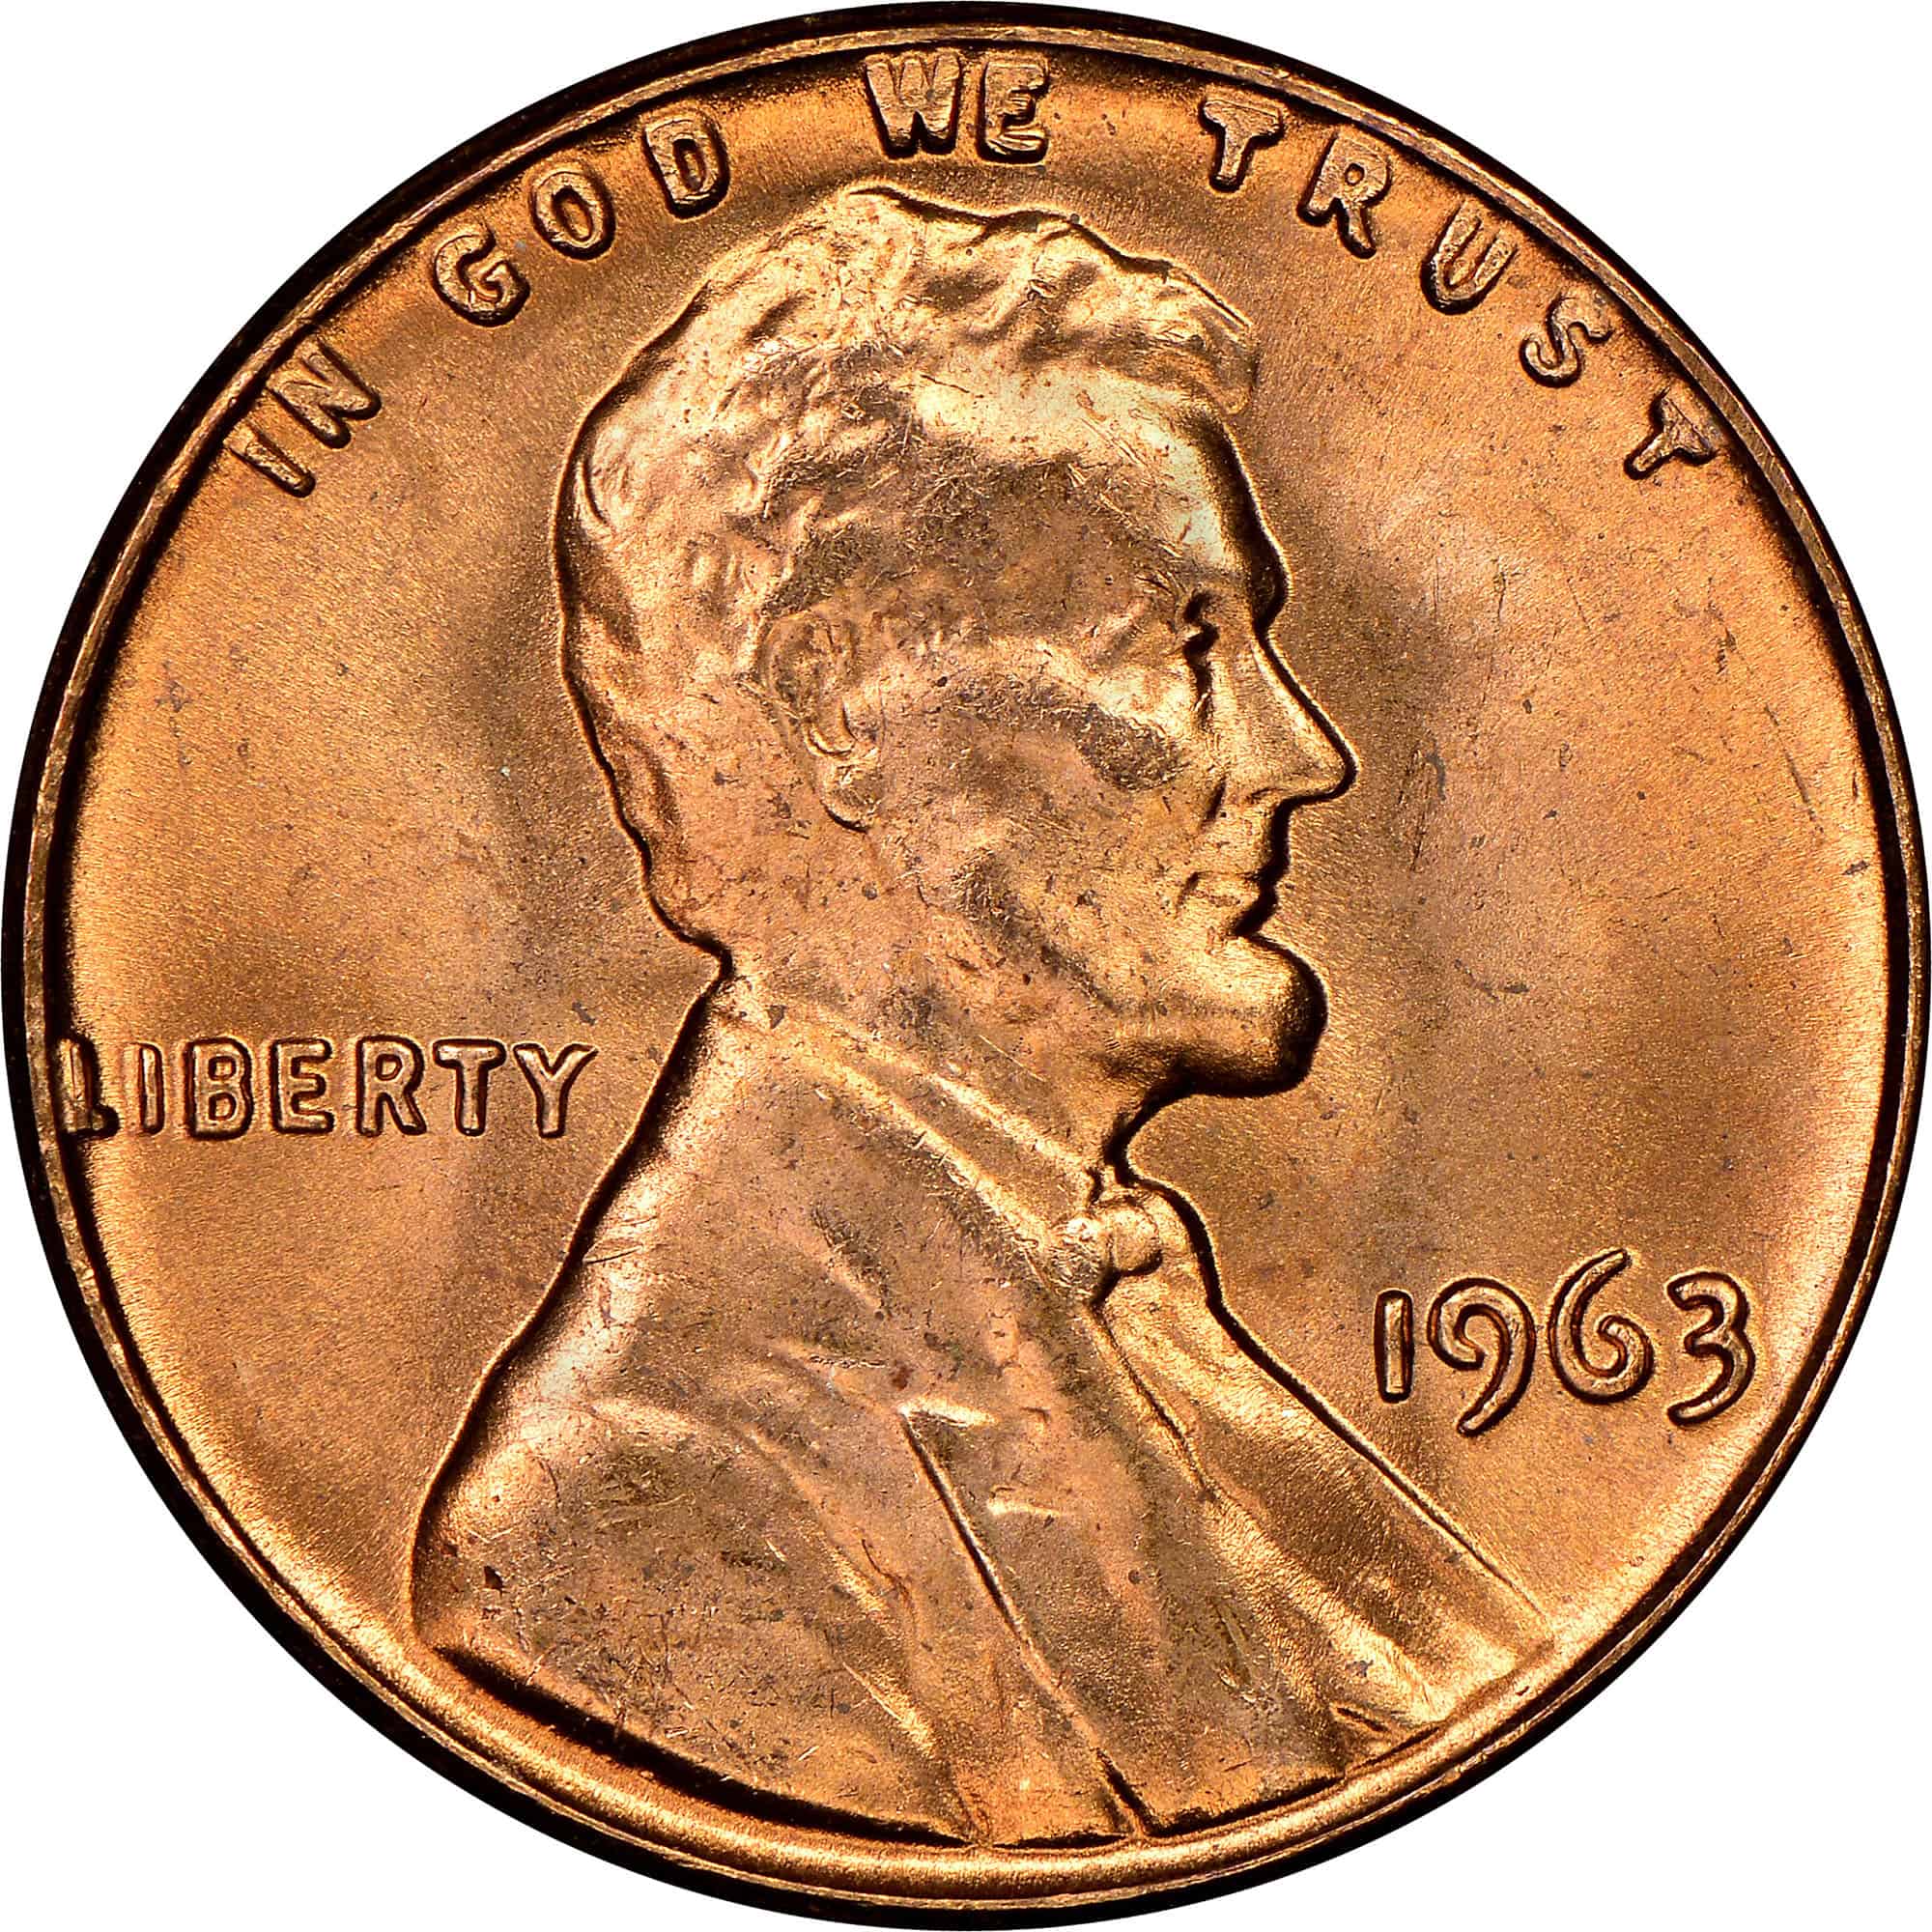 The Obverse of the 1963 Penny